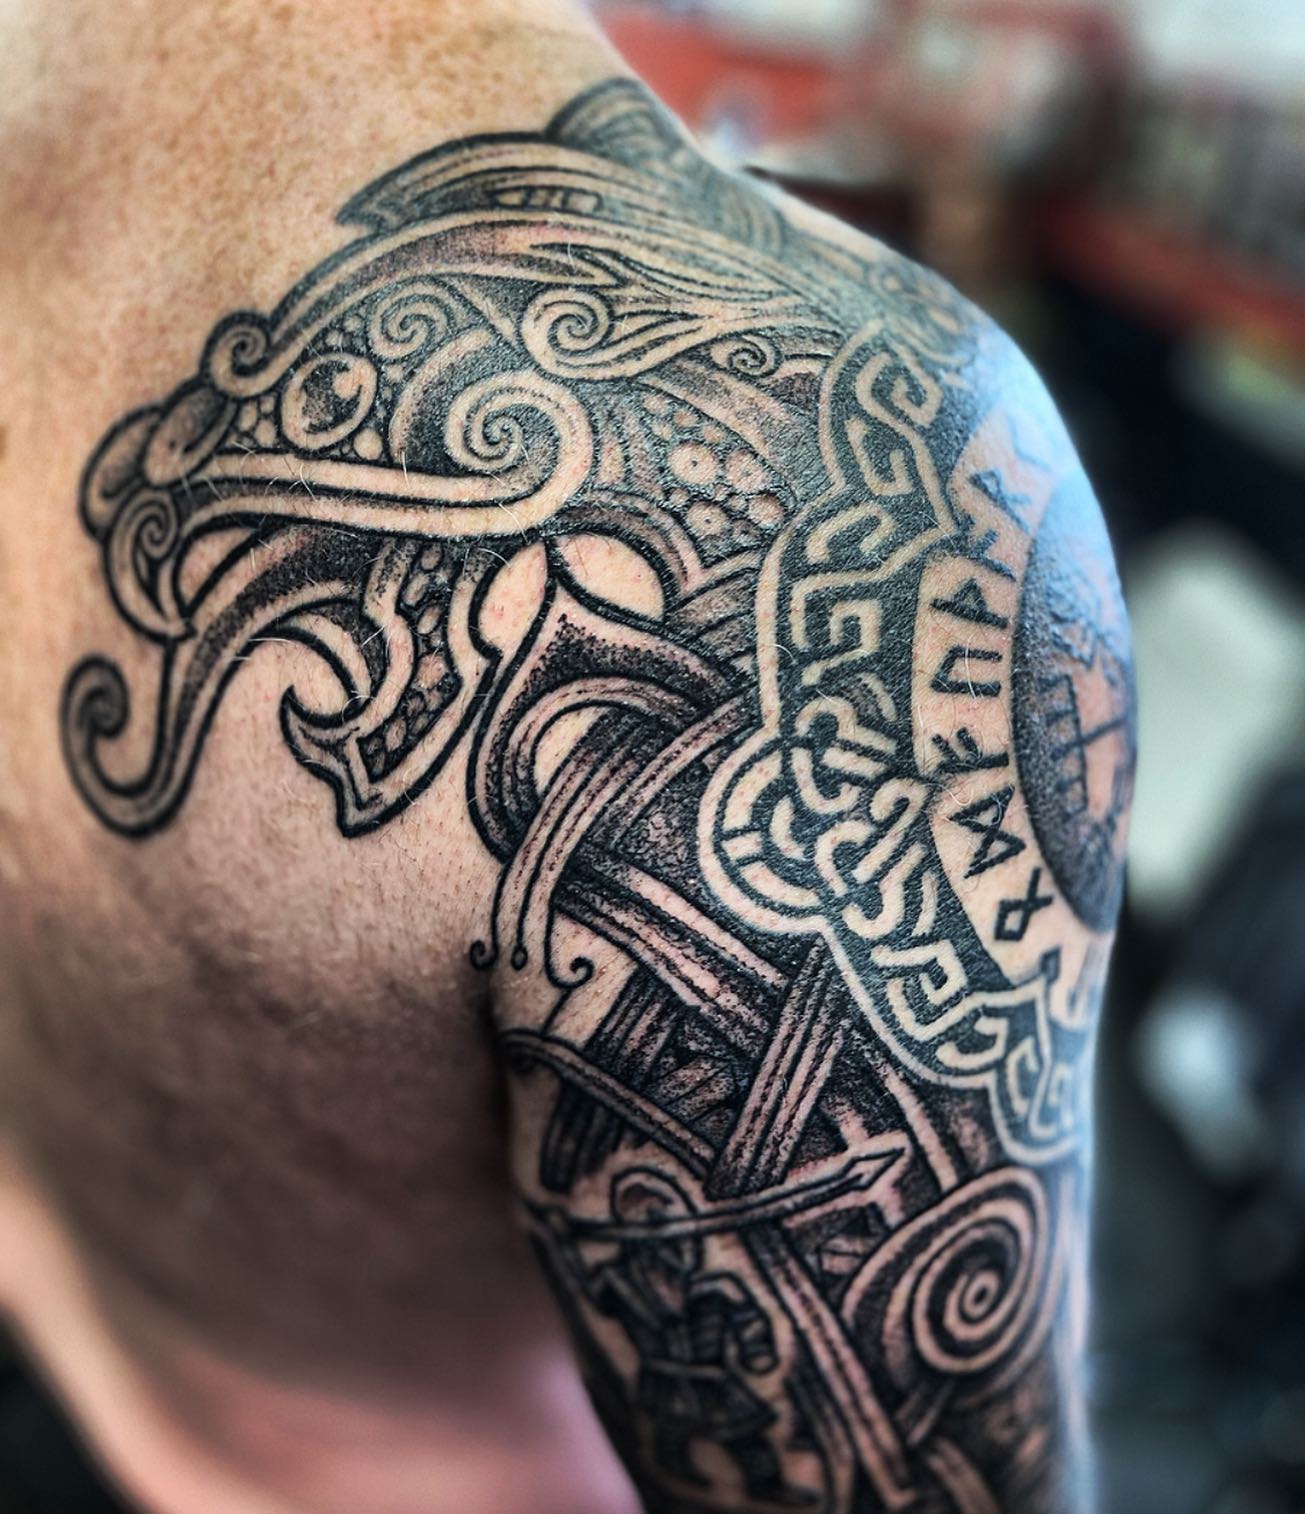 Some more of the sickest stuff from our resident marcdiamondtattoo 💪🏻⚔️

If you'd like to book in with Marc, please fill out our Tattoo Enquiry Form, or contact him directly!

                         totaltattoo barber_dts easytattoo_uk eternalink dynamiccolor lockdownneedle stencilstuff   